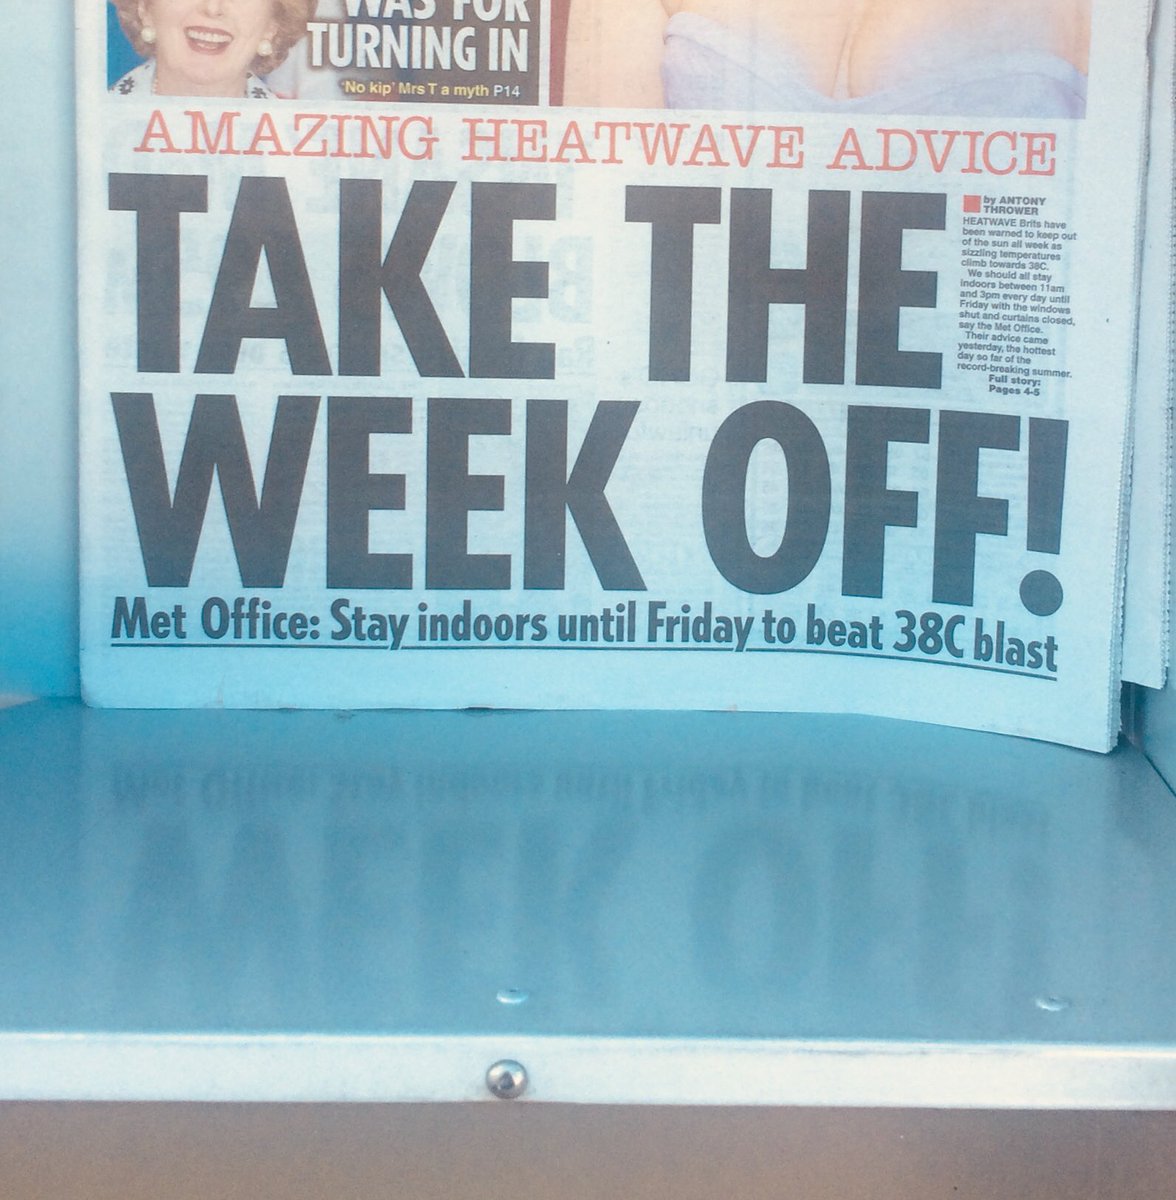 At last a tabloid headline the whole country can unite behind. #Heatwaveuk #heatstrike